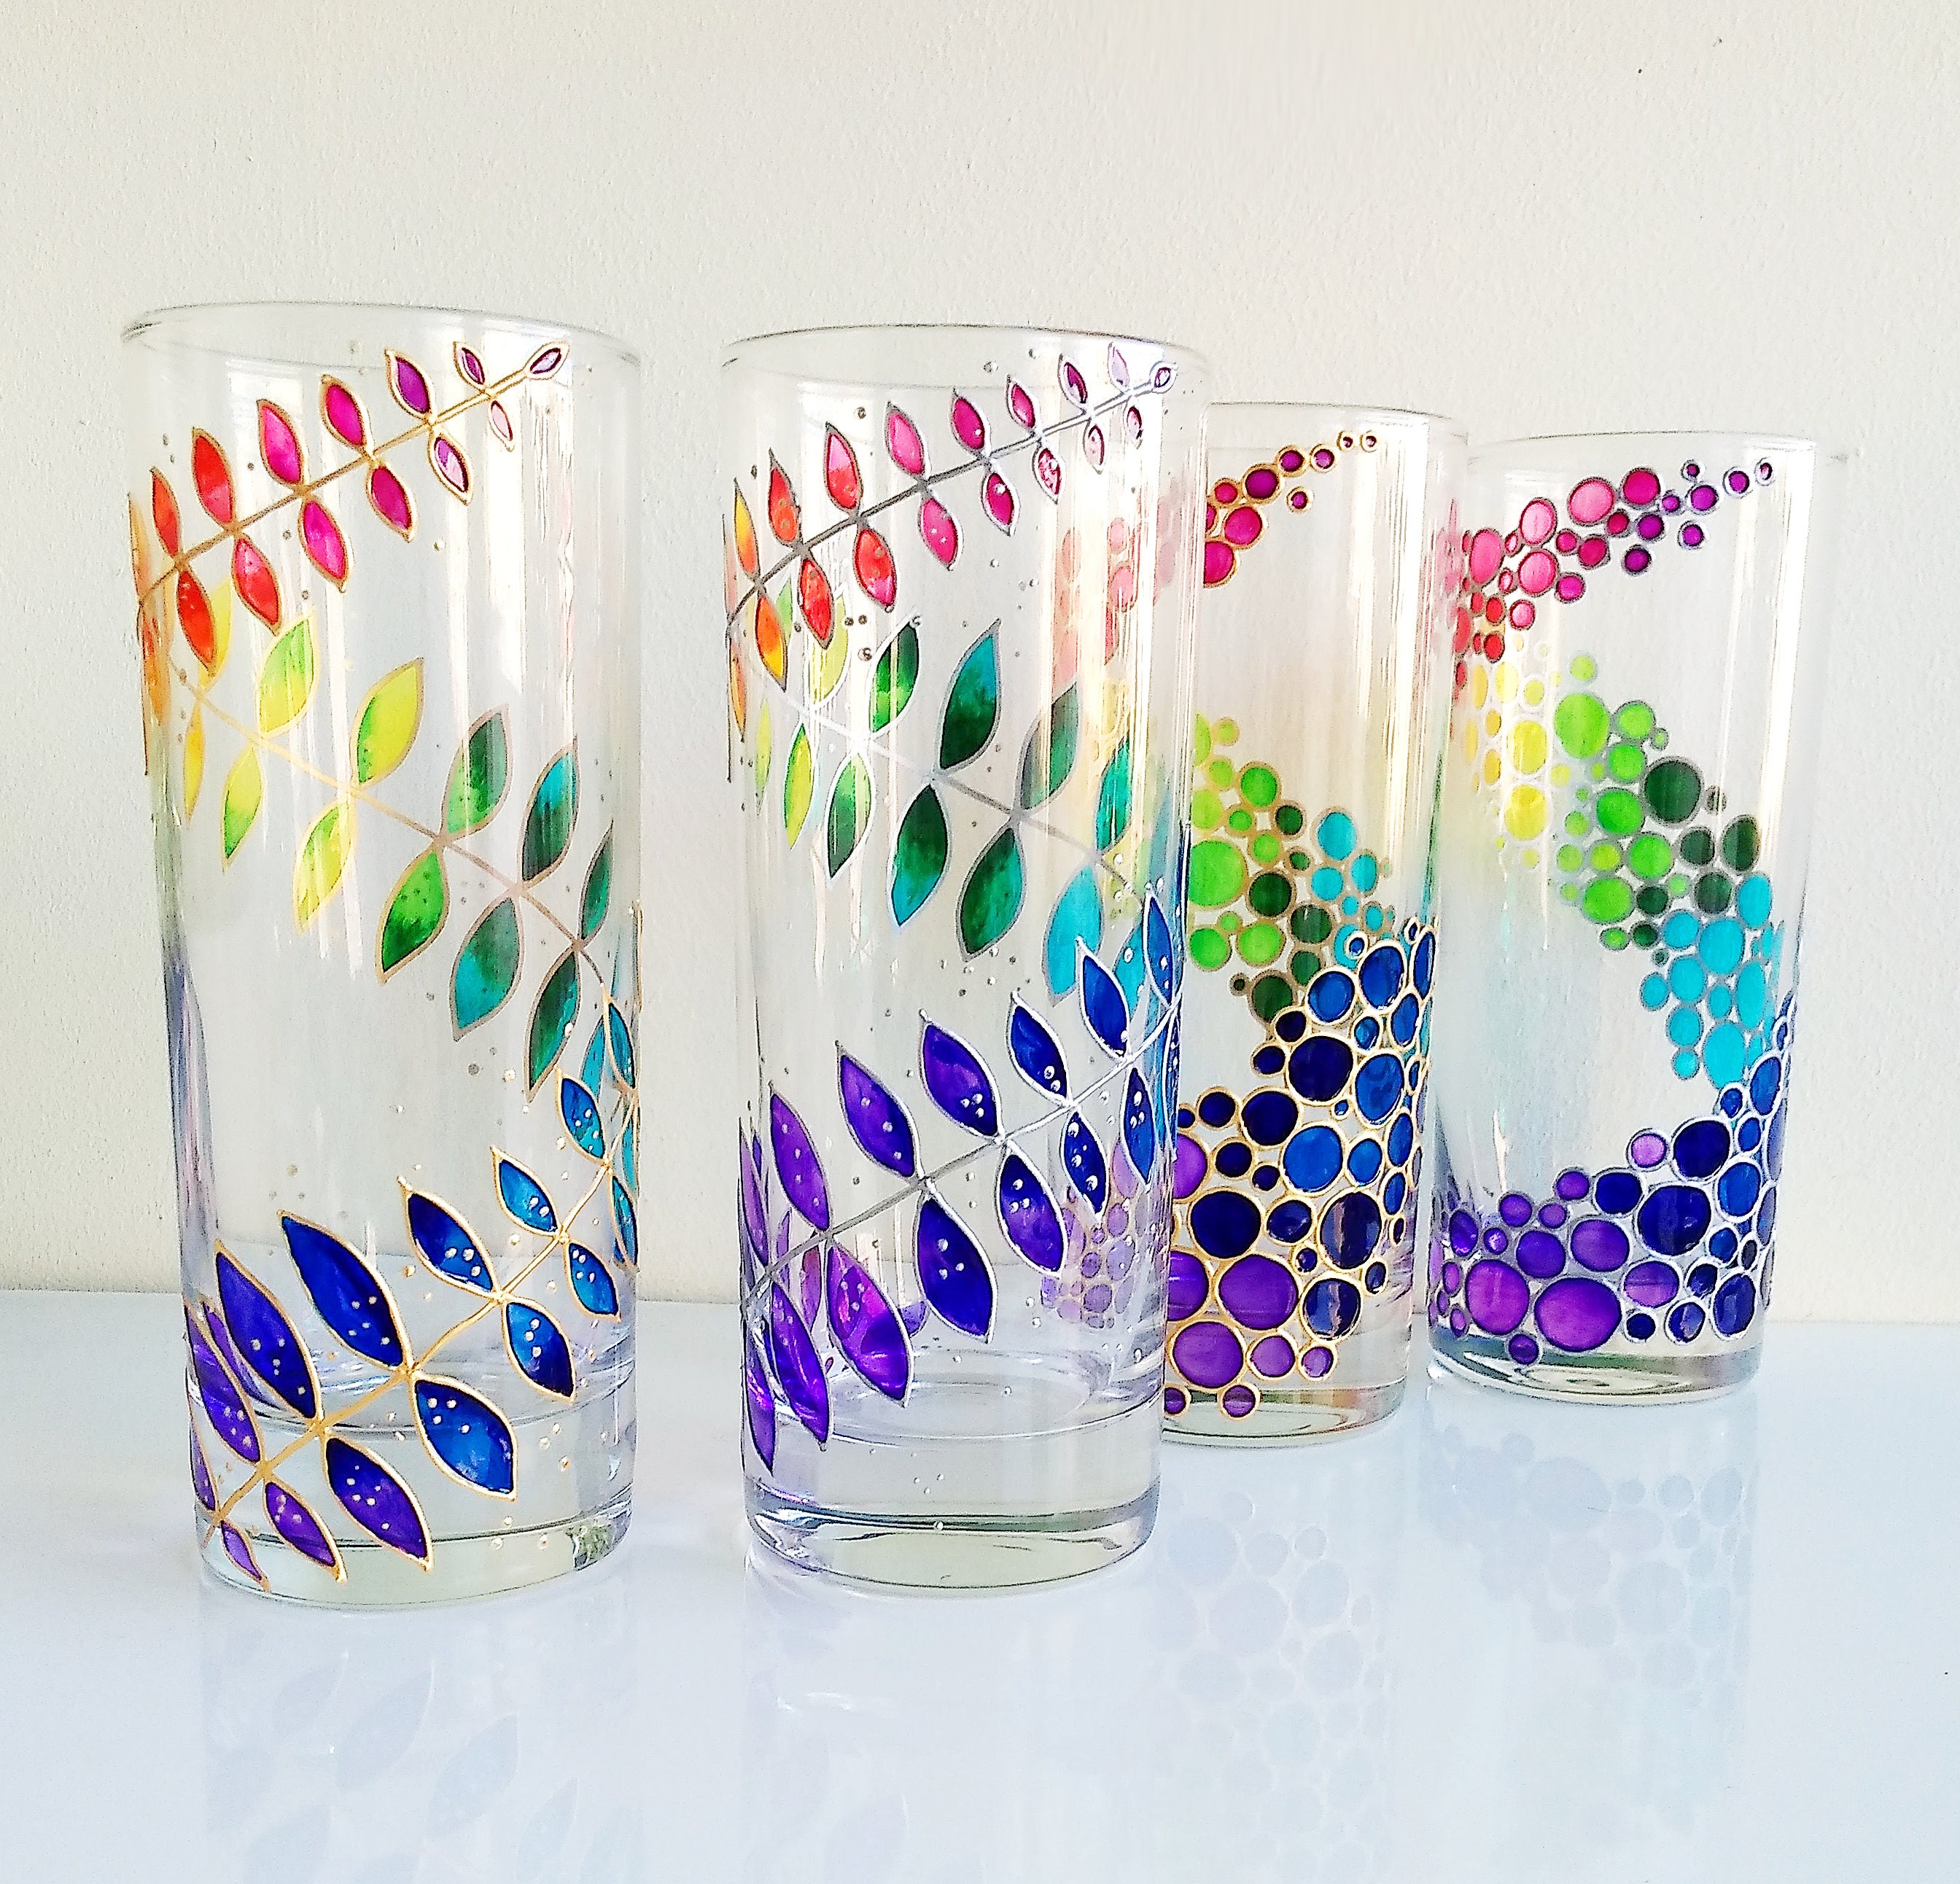 Rainbow Drinking Glasses Set of 2, Couple Colorful Hand Painted Water  Glasses, Glass Tumblers With Rainbow Bubbles Design 